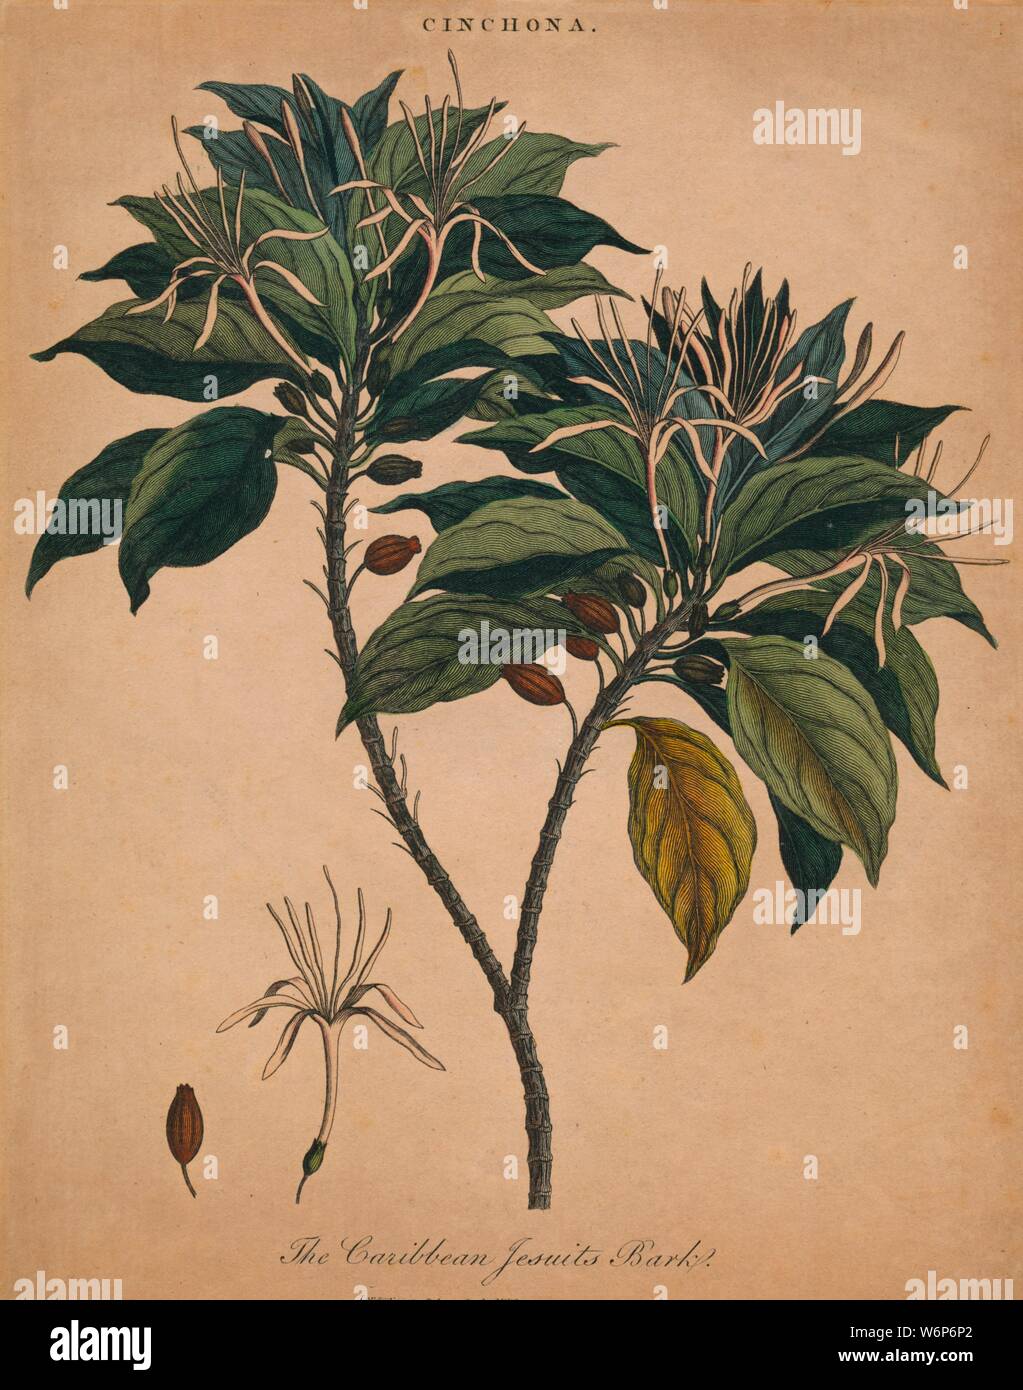 'Cinchona. The Caribbean Jesuits Bark', 1801. Cinchona, source of the anti-malarial remedy quinine, from Encyclopaedia Londinensis, published  by John Wilkes c1796-1828. Though native to Andean forests of Peru, the plant is called here Caribbean Jesuits Bark. Original plate engraved by J. Pass. Stock Photo